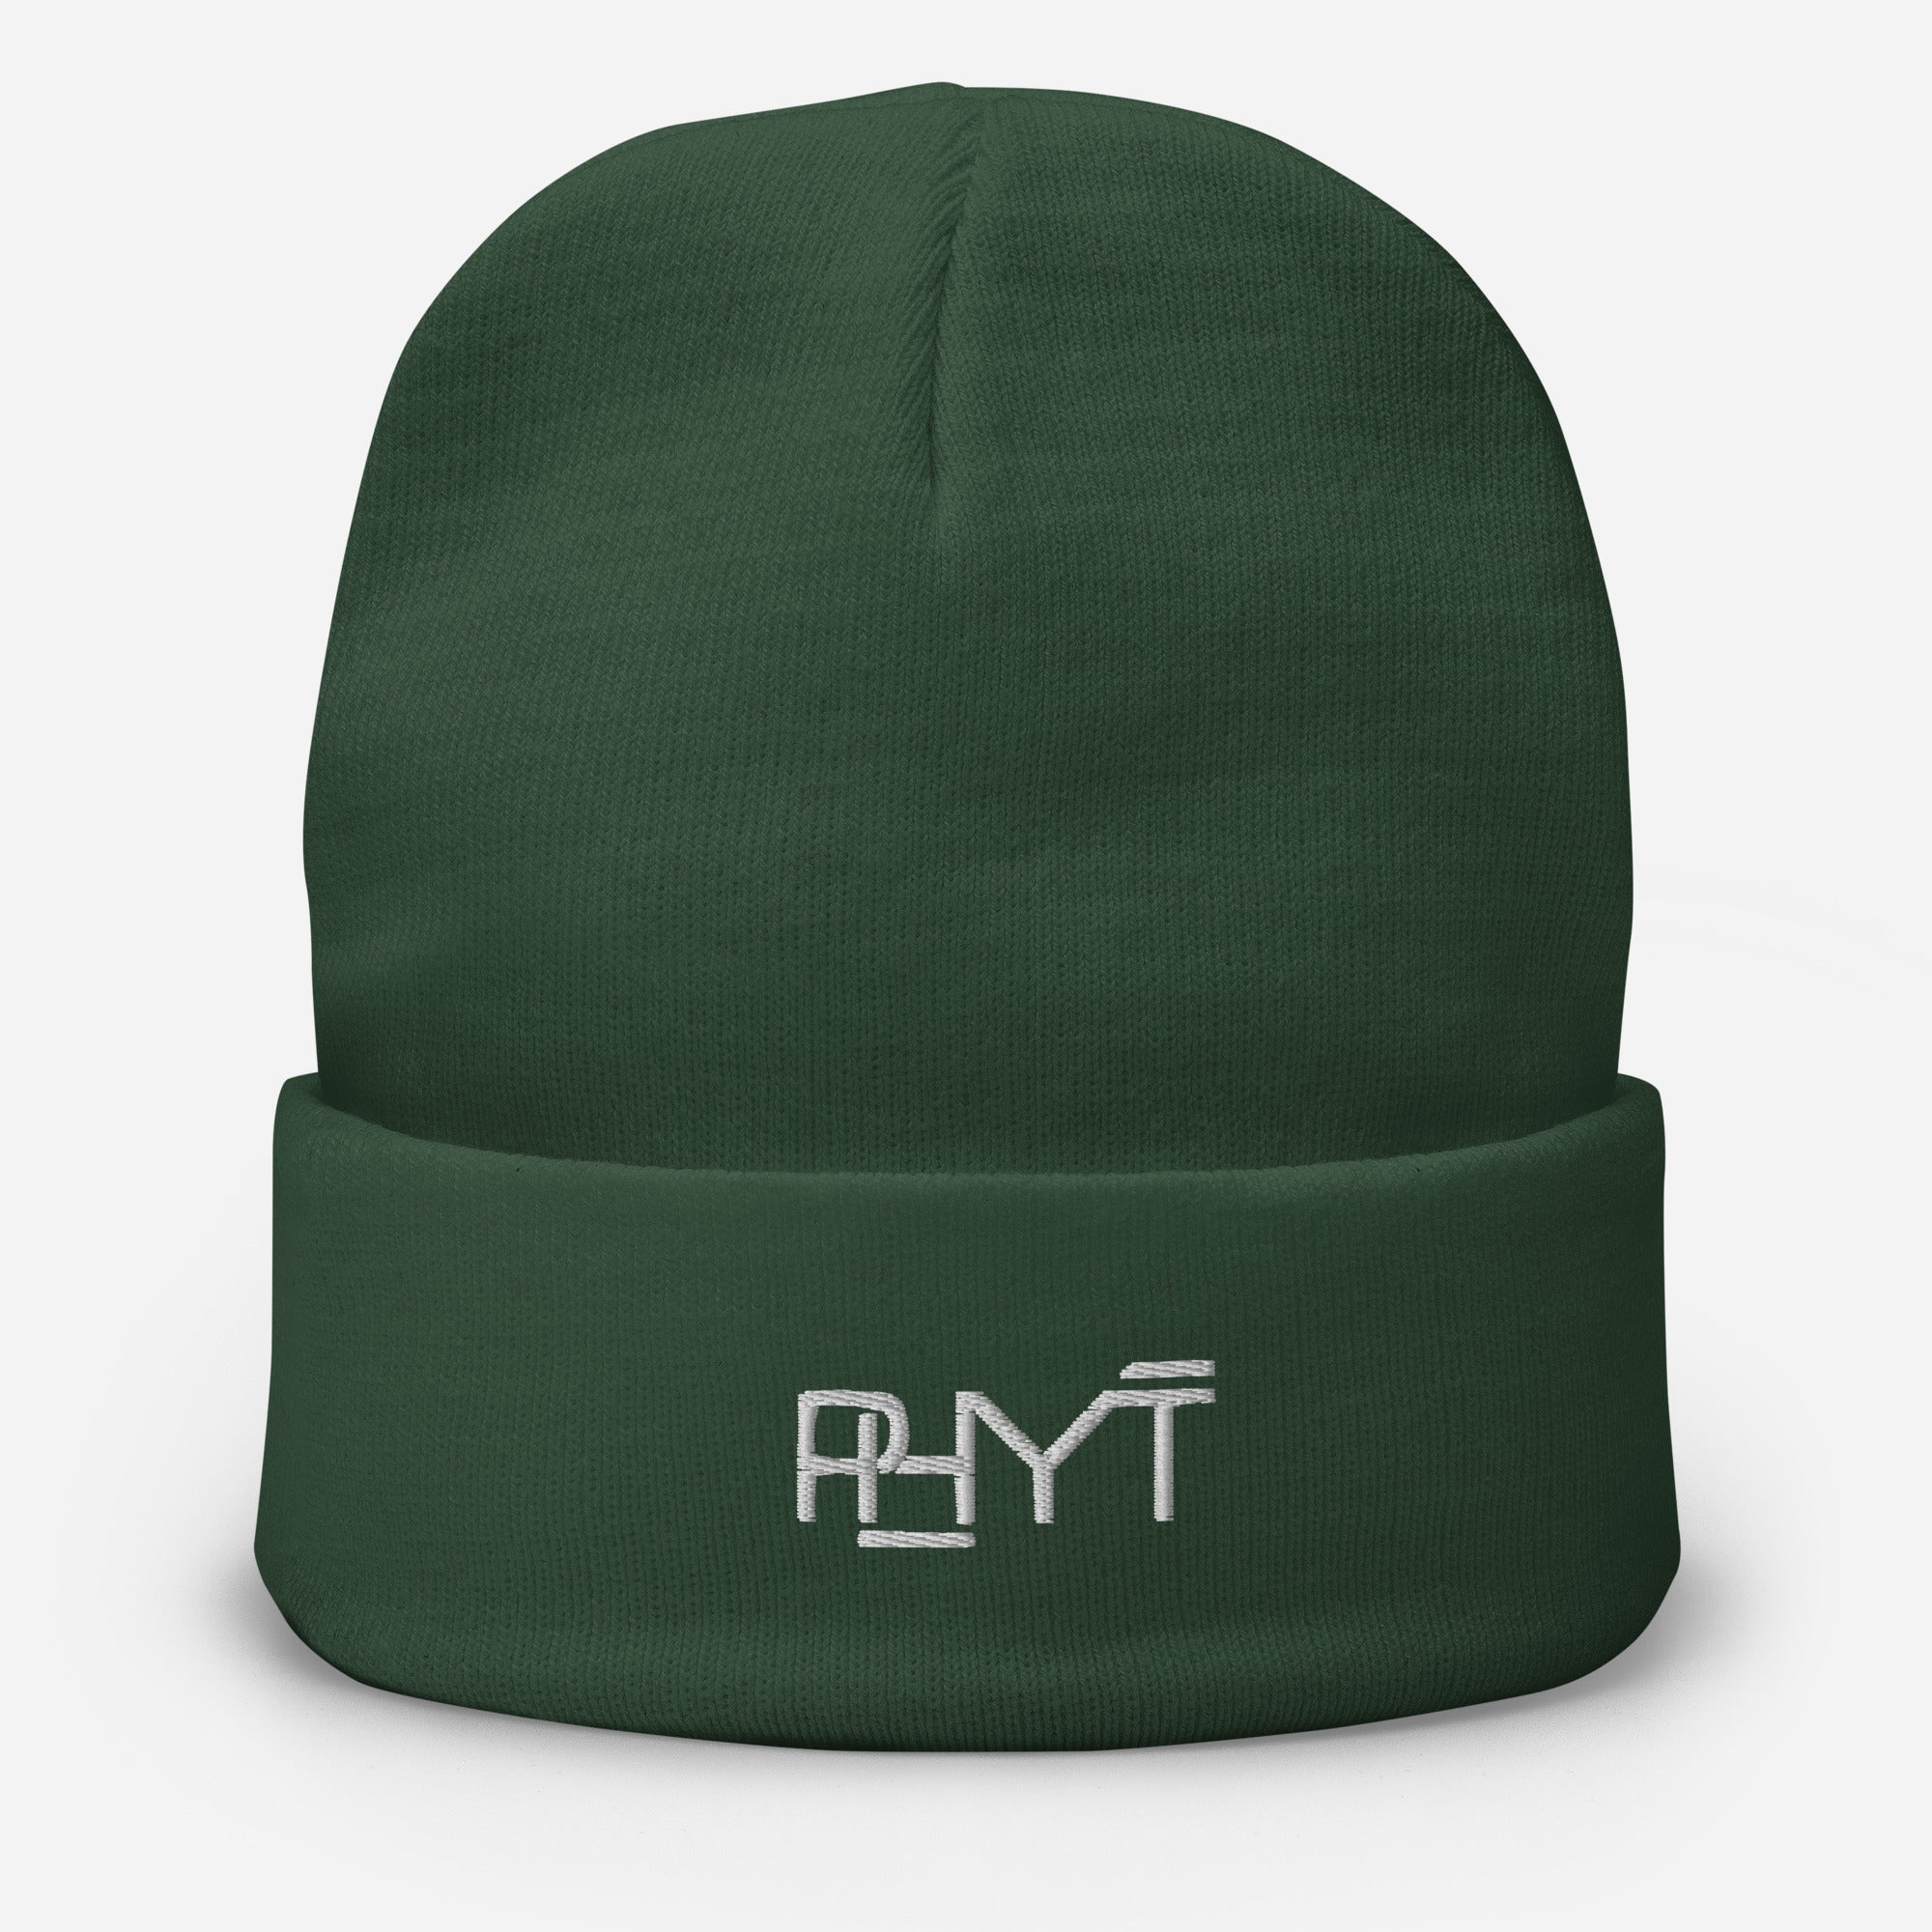 PHYT Embroidered Beanie